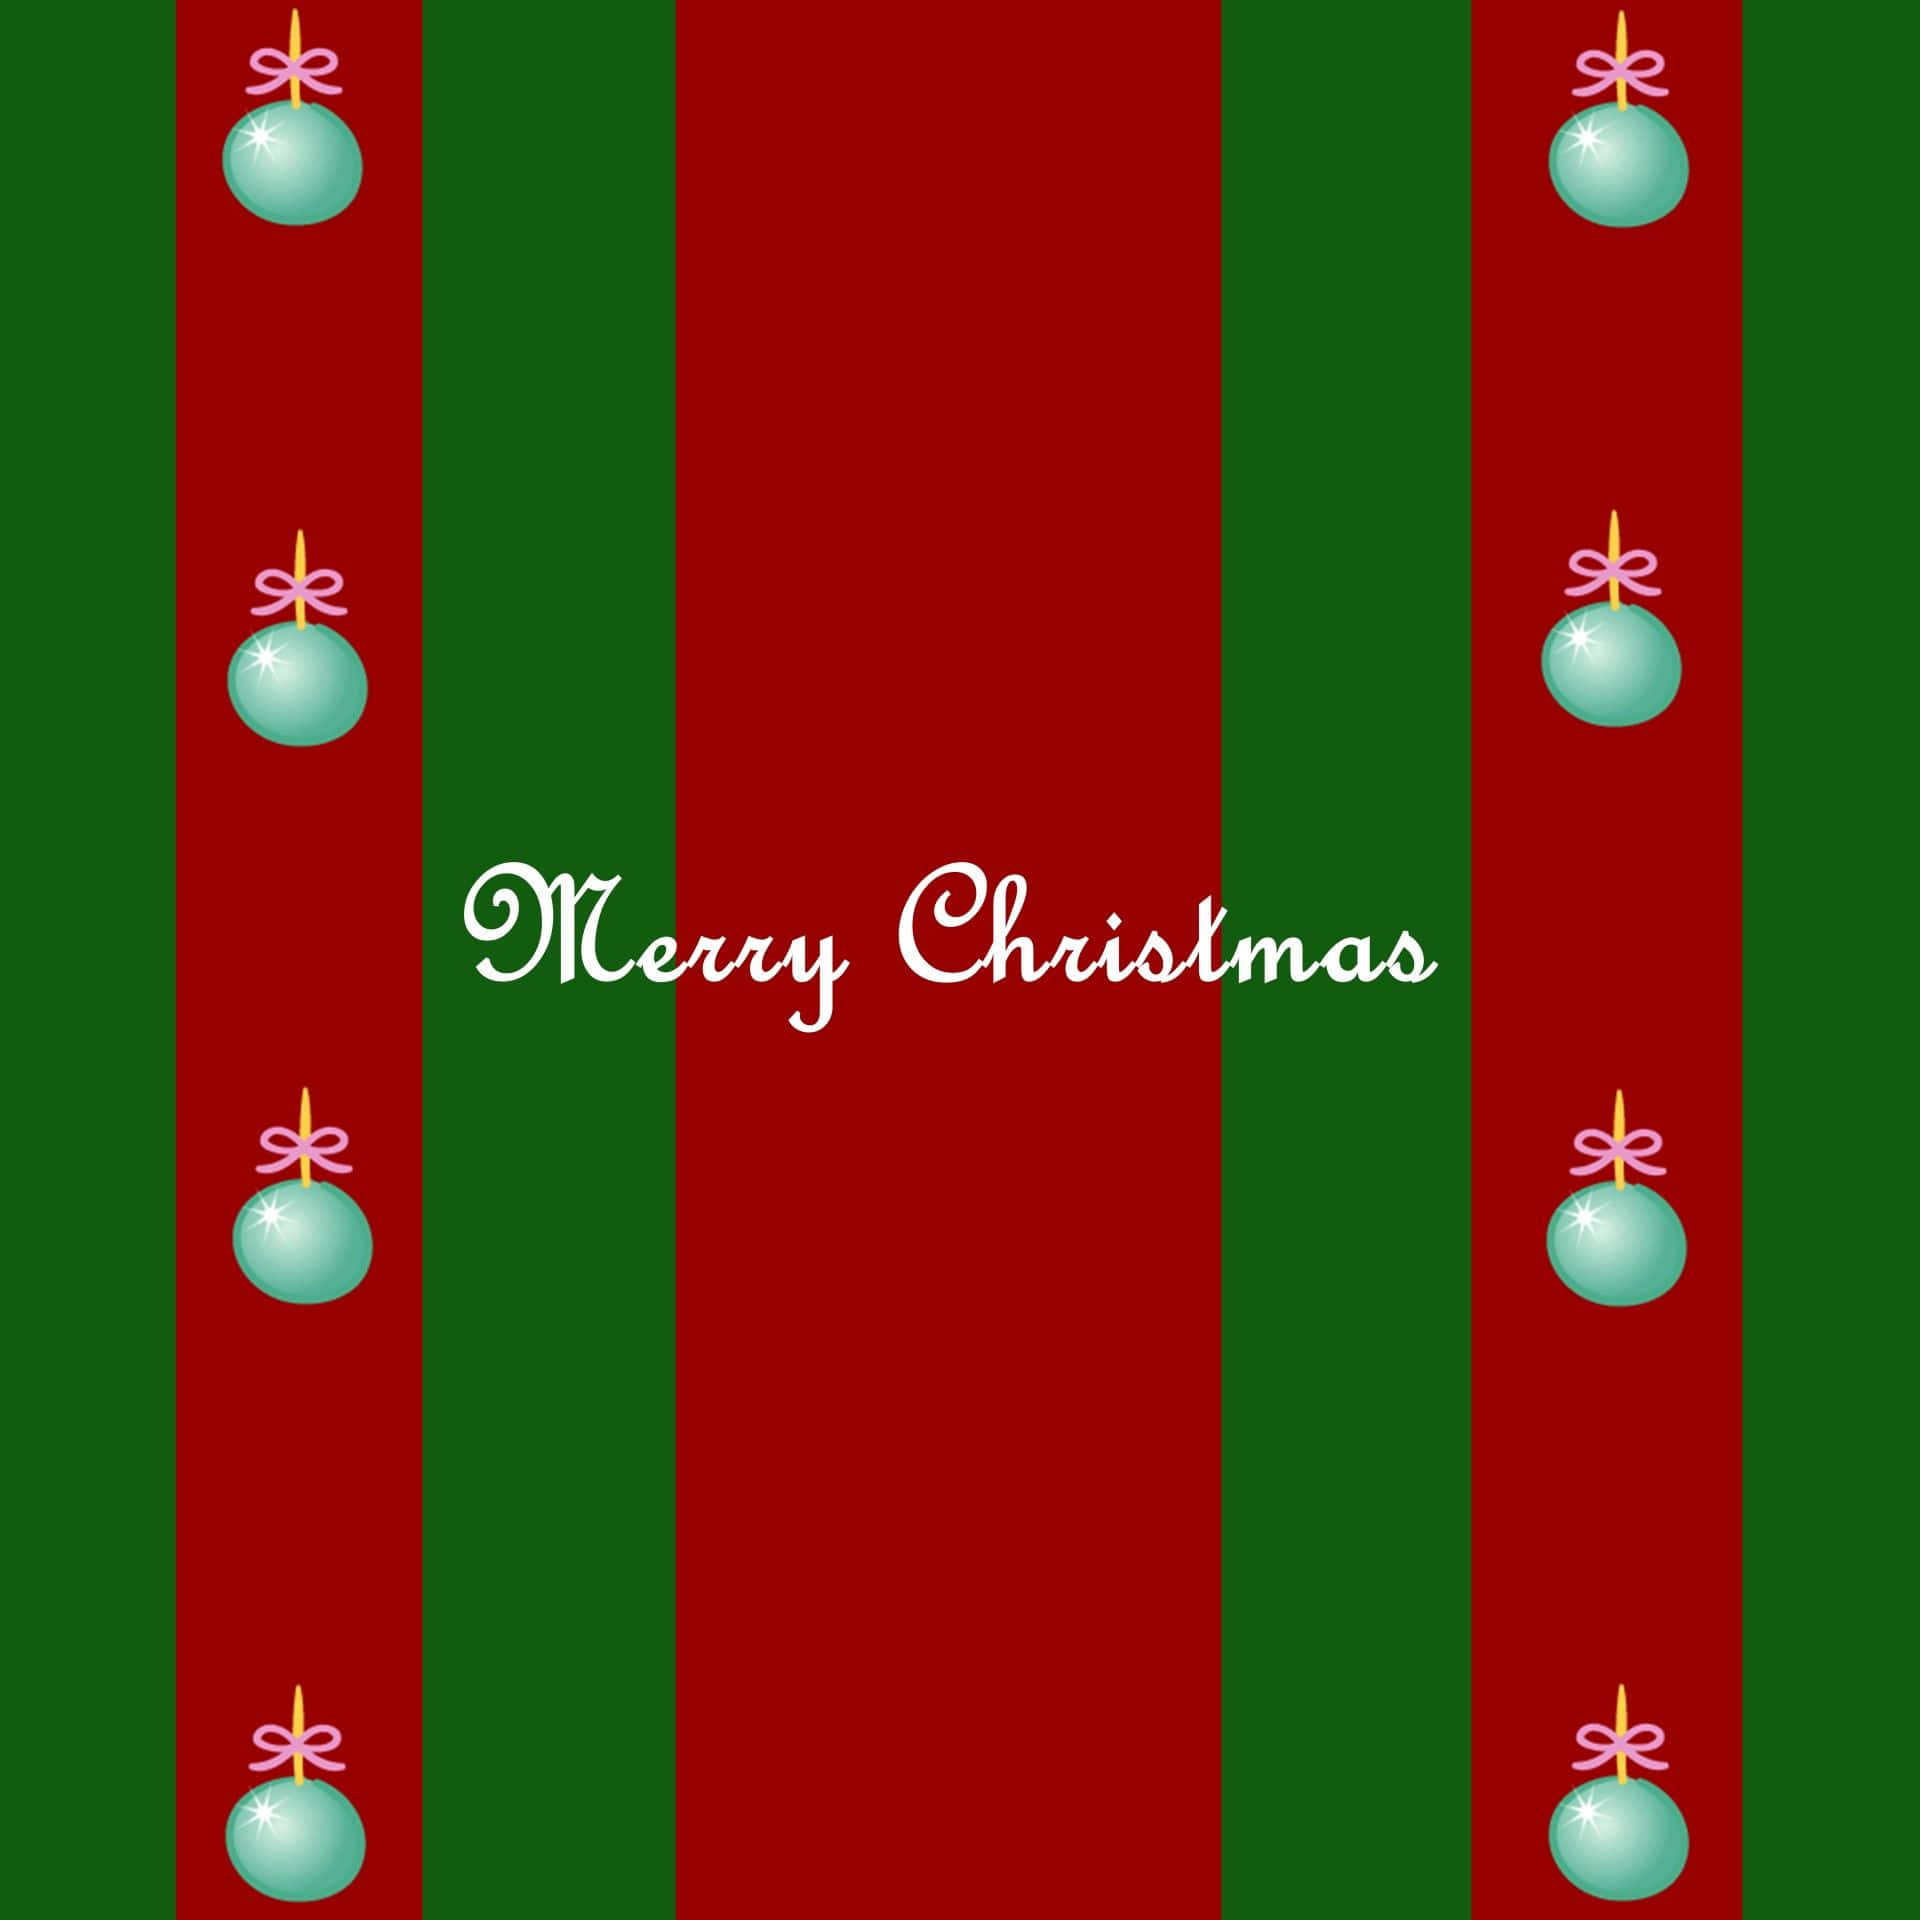 Celebrate the joyful Christmas season with Red and Green decorations Wallpaper